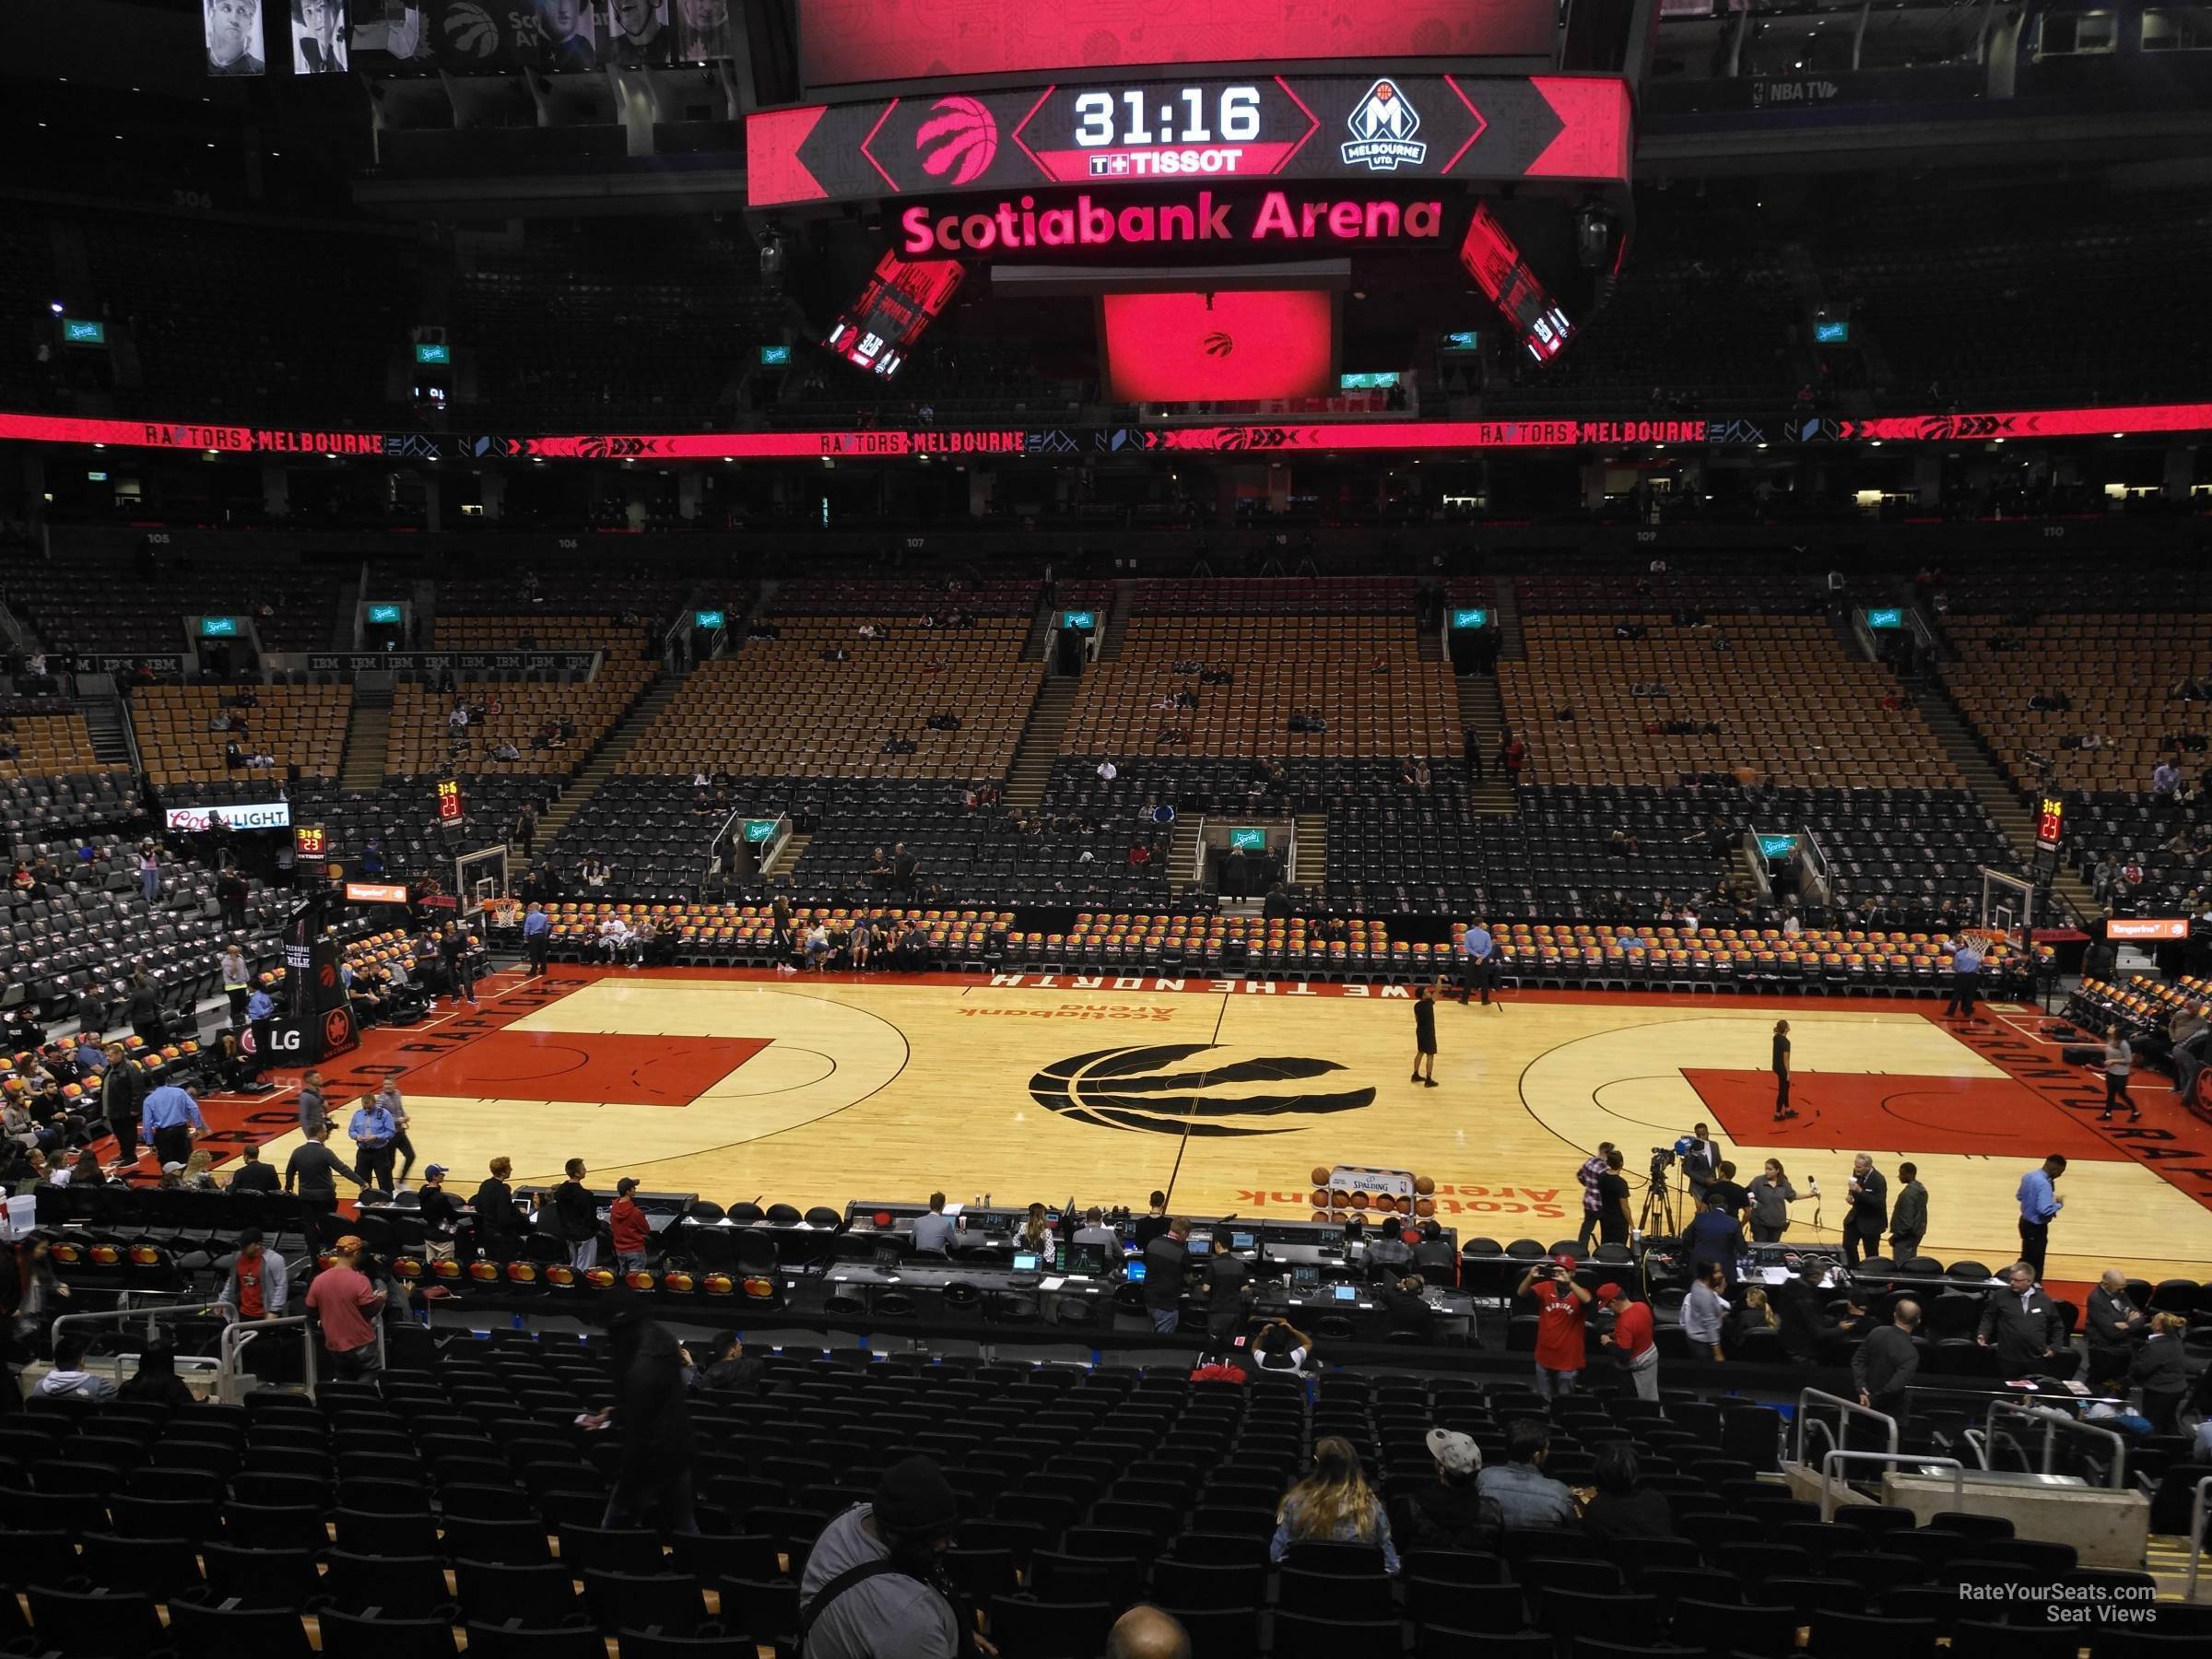 section 119, row 28 seat view  for basketball - scotiabank arena